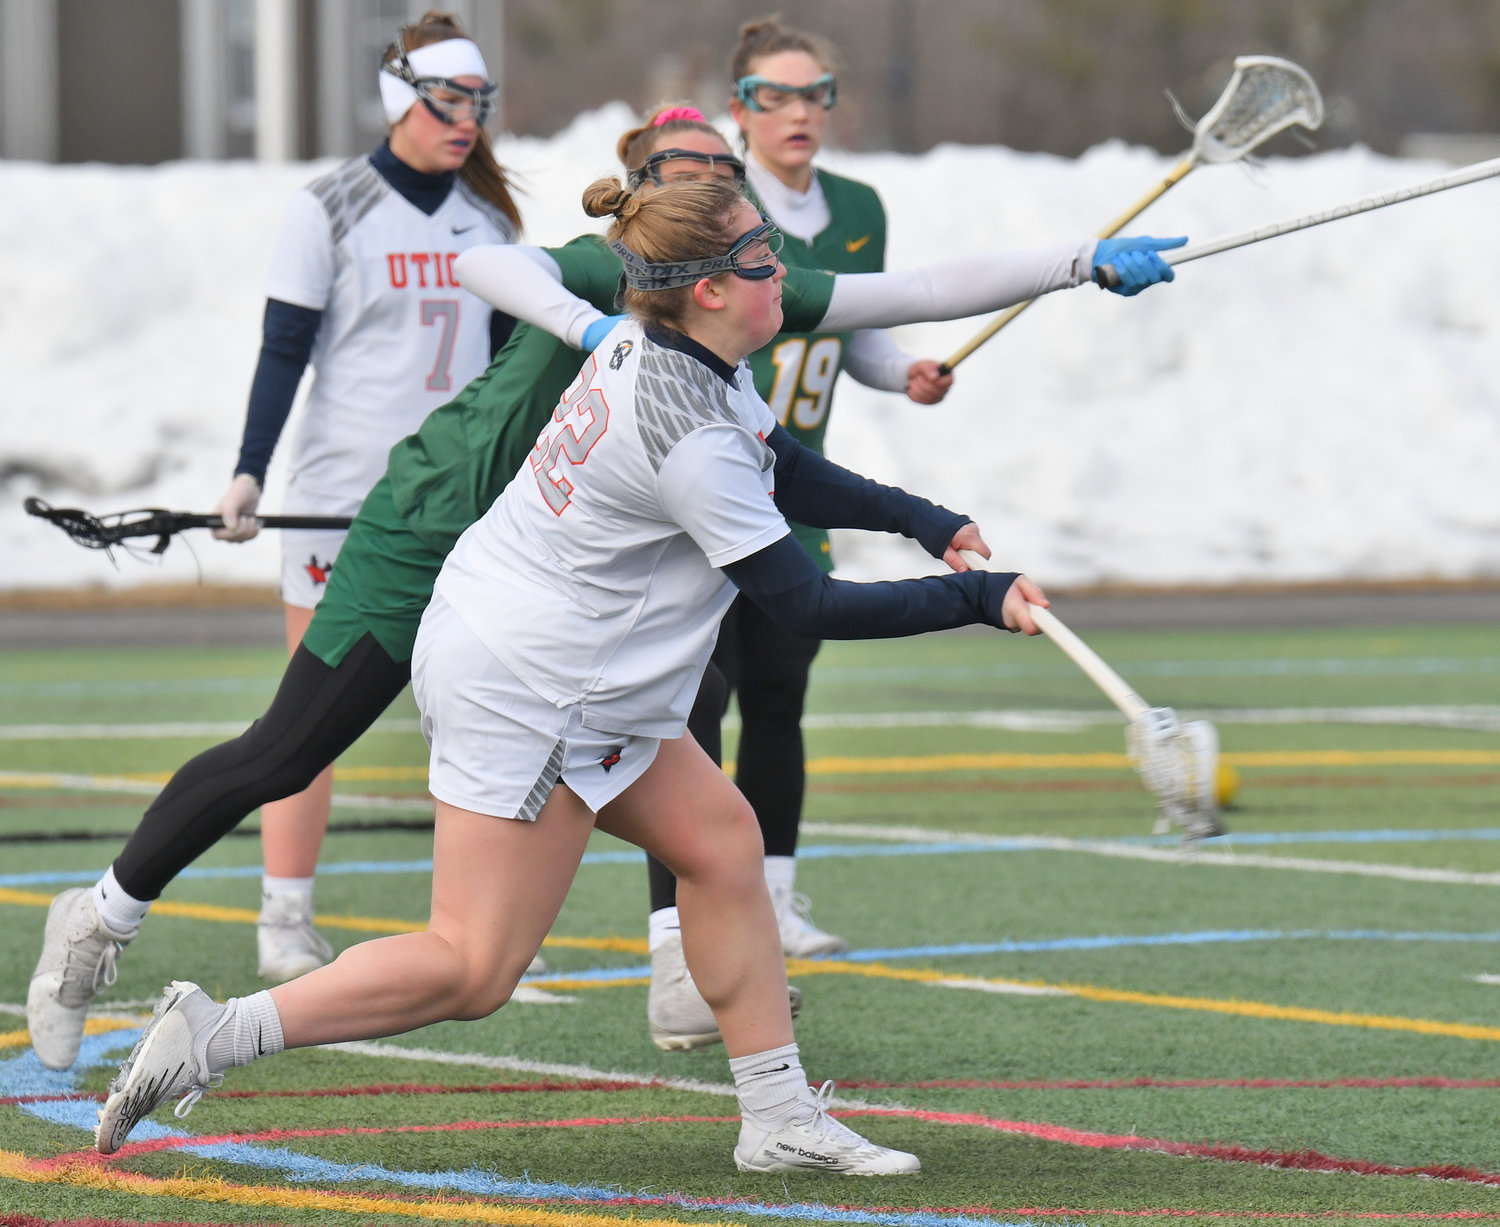 SHOOTS AND SCORES — Utica University’s Samantha DeCondo, of Whitesboro, shoots and scores against SUNY Oswego during the first quarter of non-league women’s lacrosse action on Wednesday at Gaetano Stadium in Utica. DeCondo scored a pair of goals, but the Pioneers were edged 6-5.